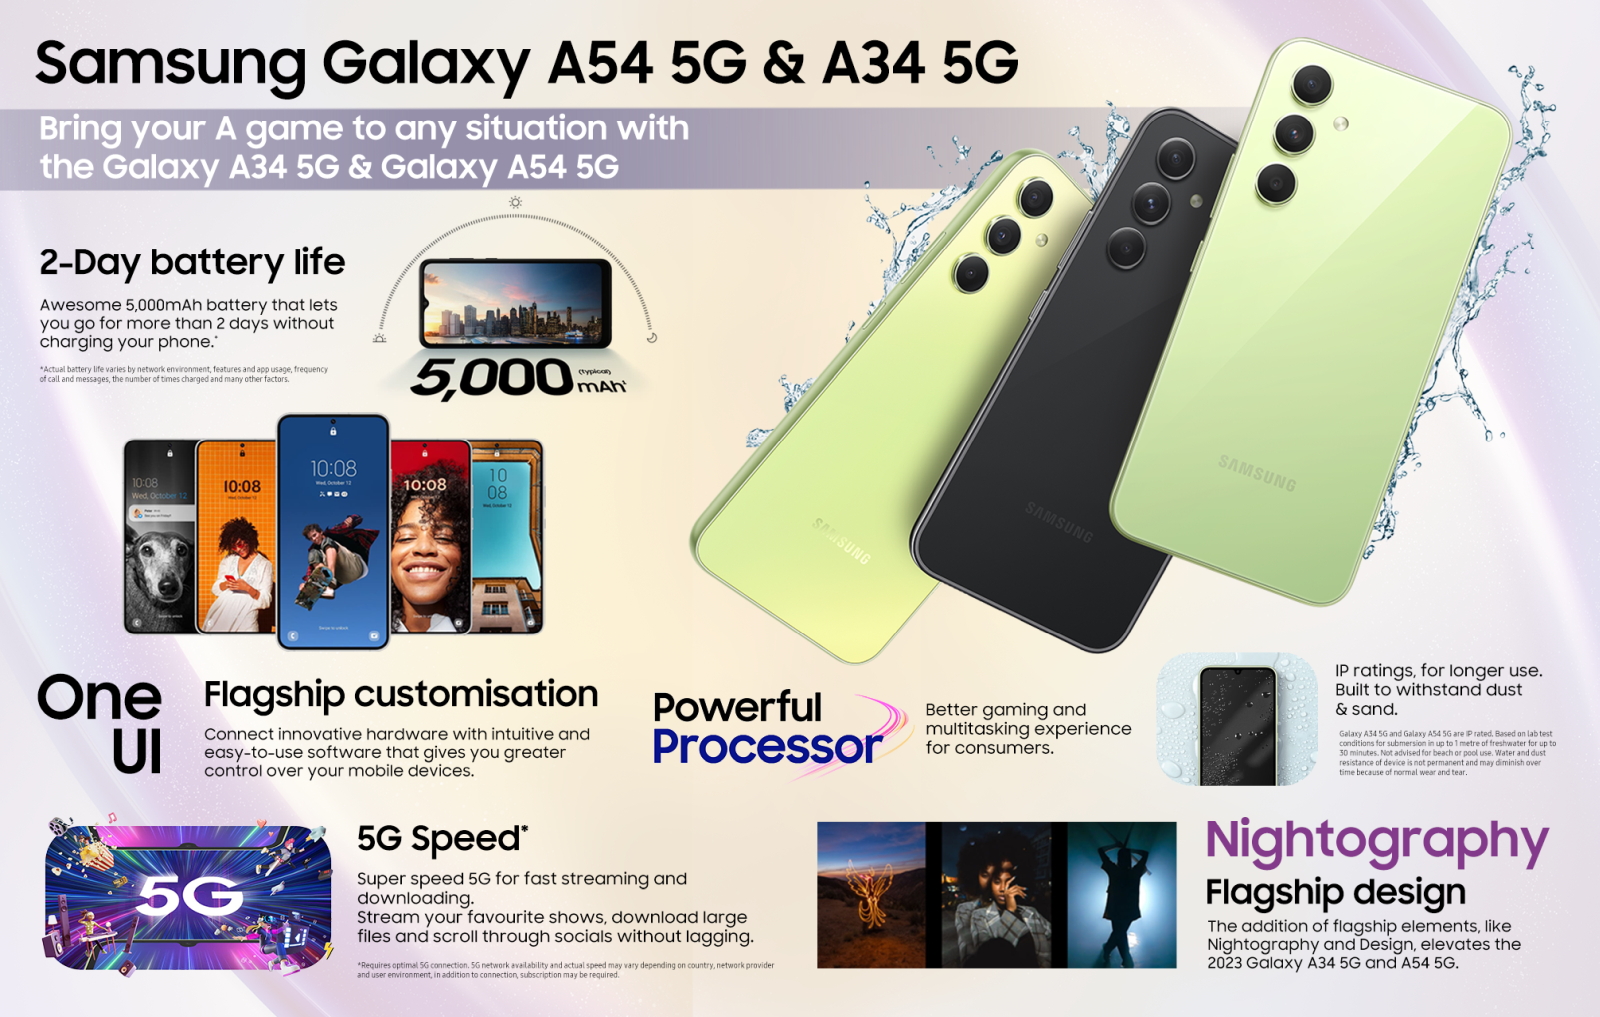 The Samsung Galaxy A54 and Galaxy A34: Awesome Experiences for All